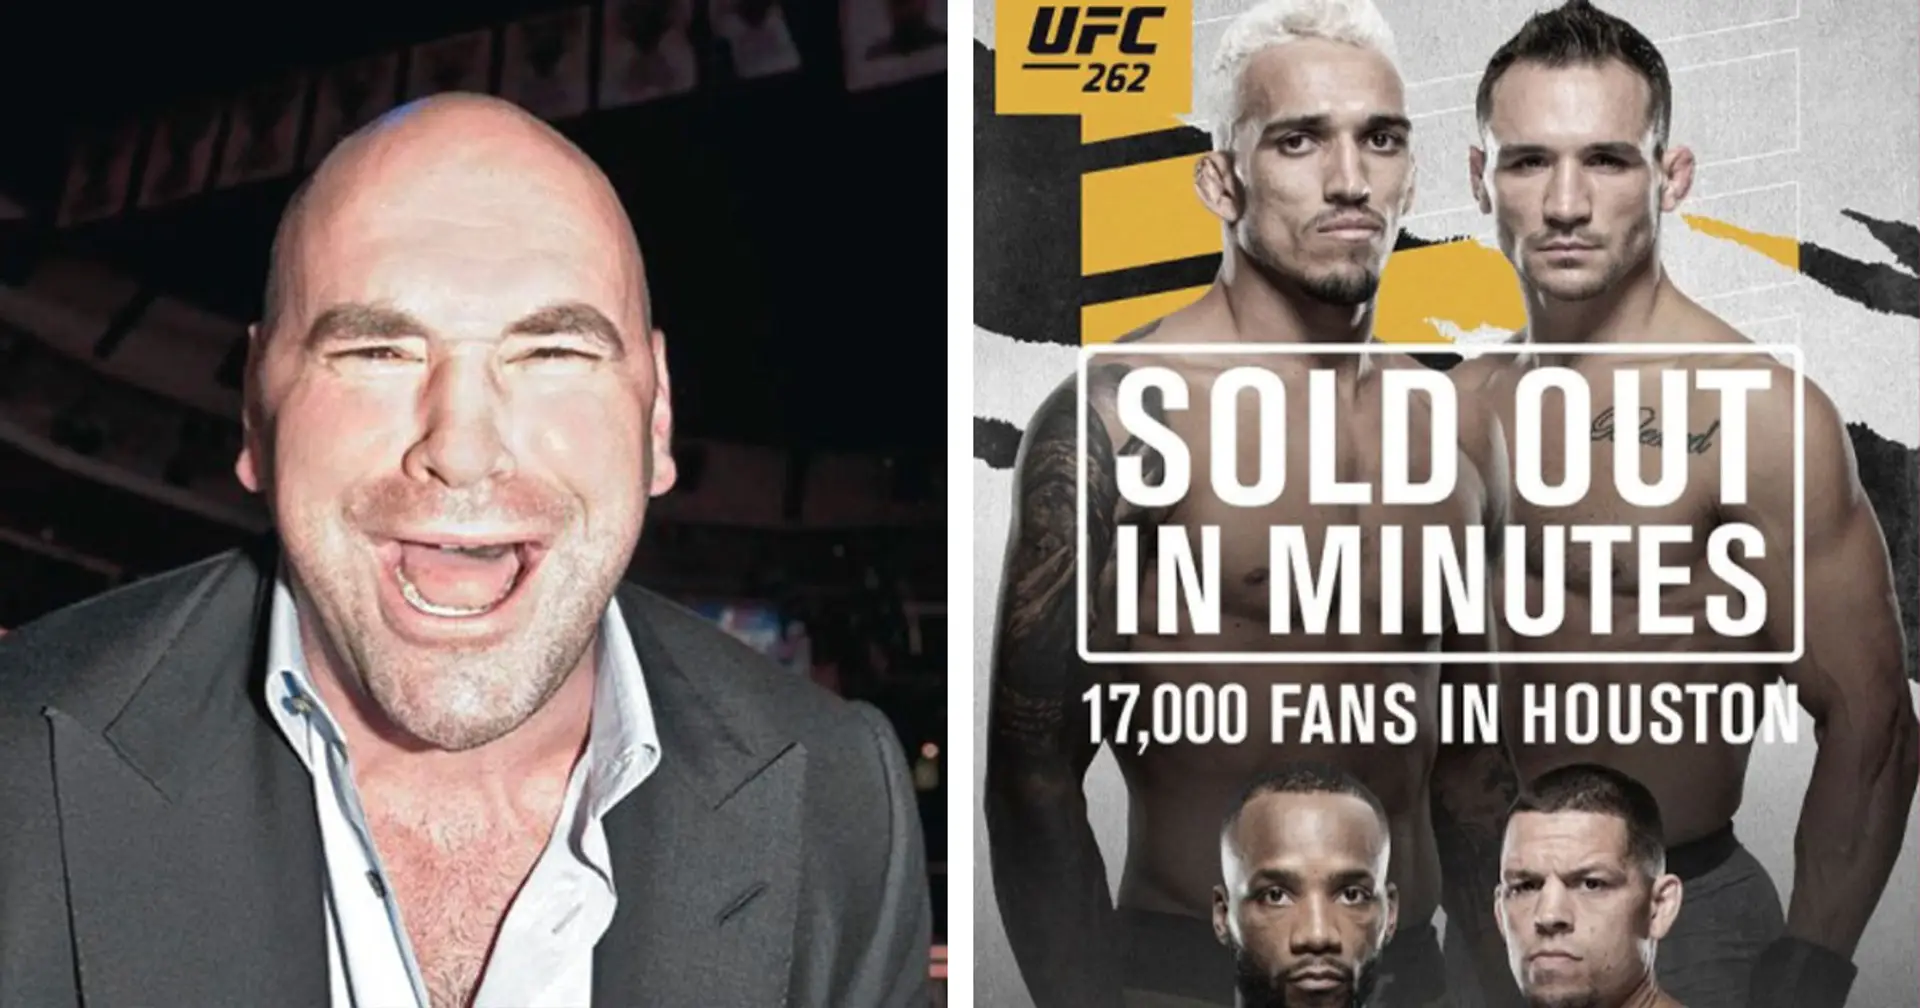 Dana White: Tickets to UFC 262 'sold out in minutes'